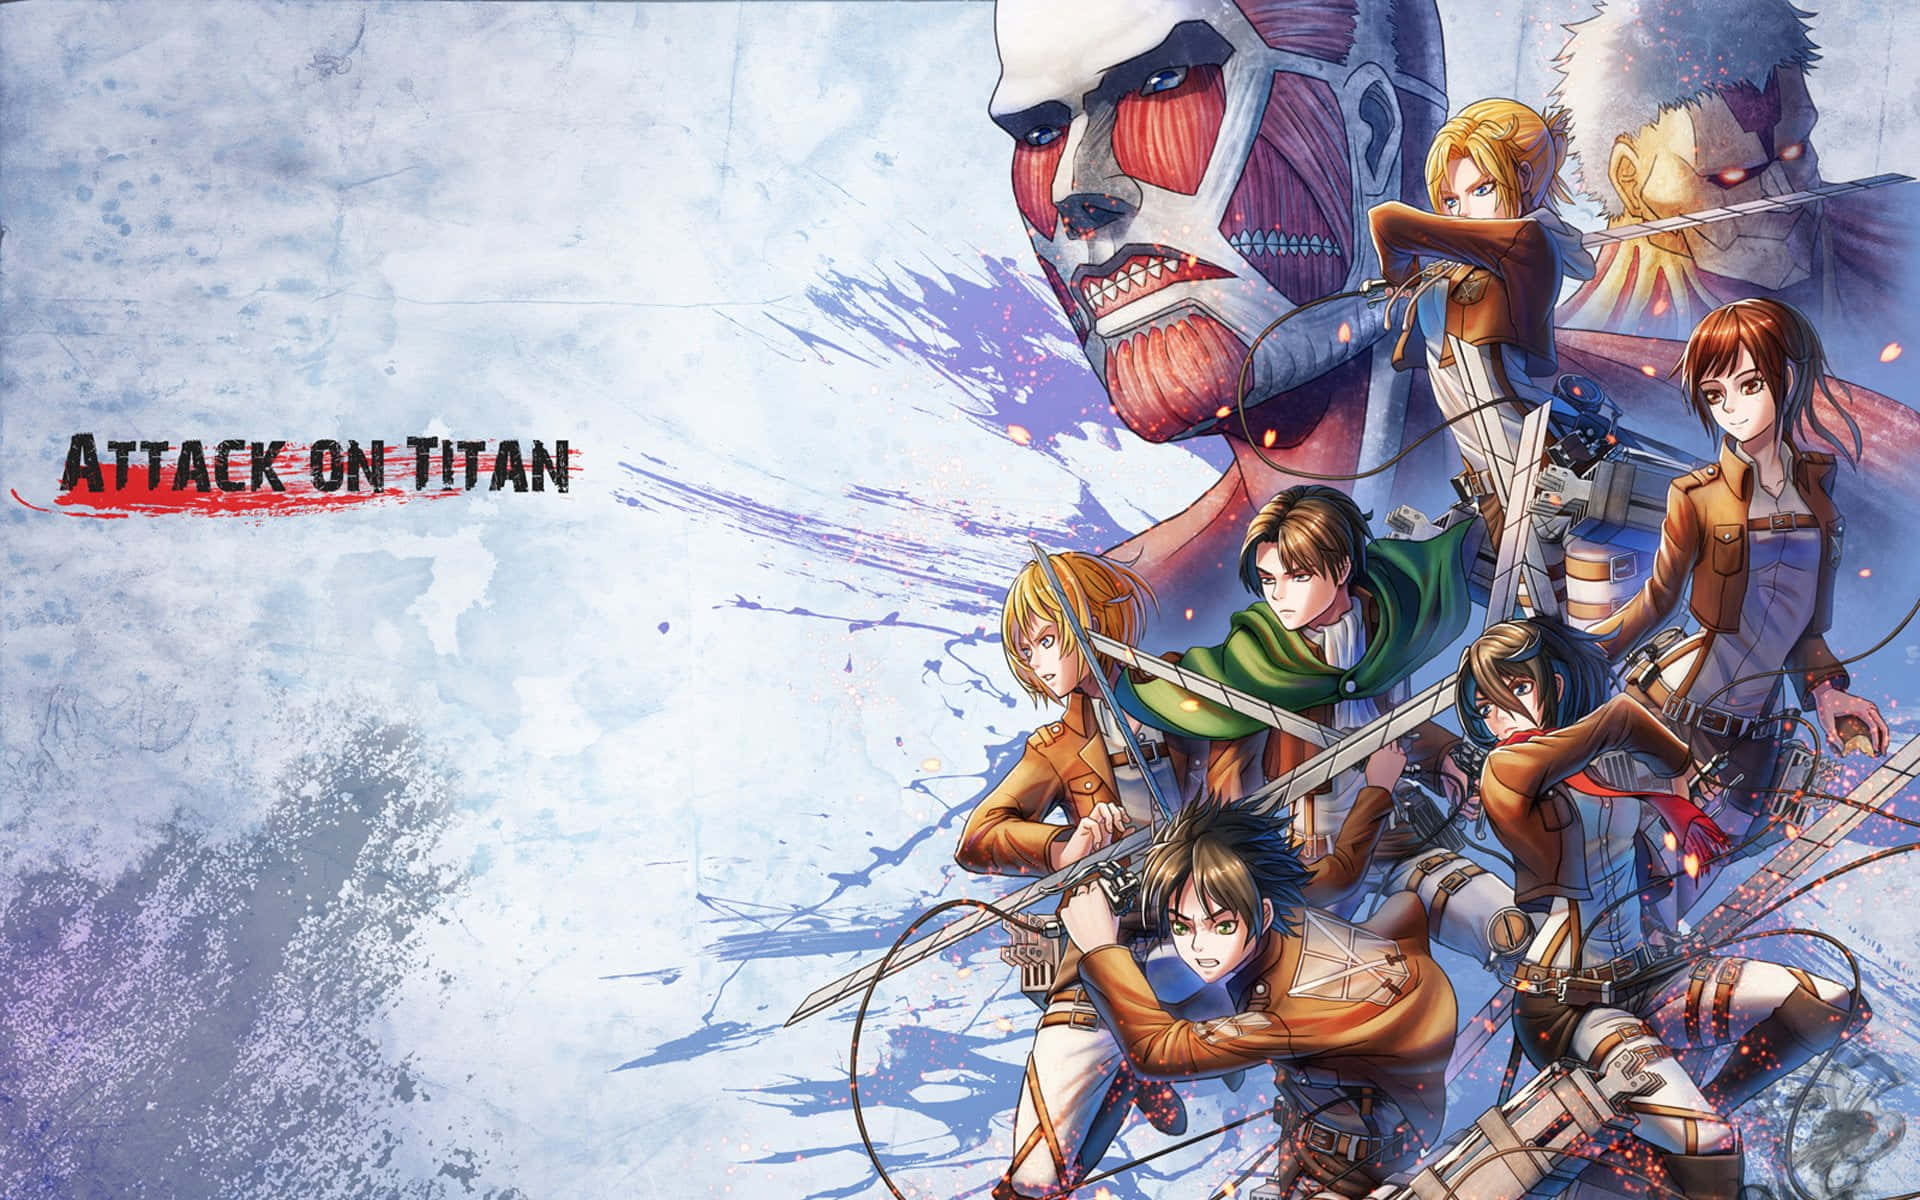 Get your hands on this awesome Attack On Titan poster! Wallpaper